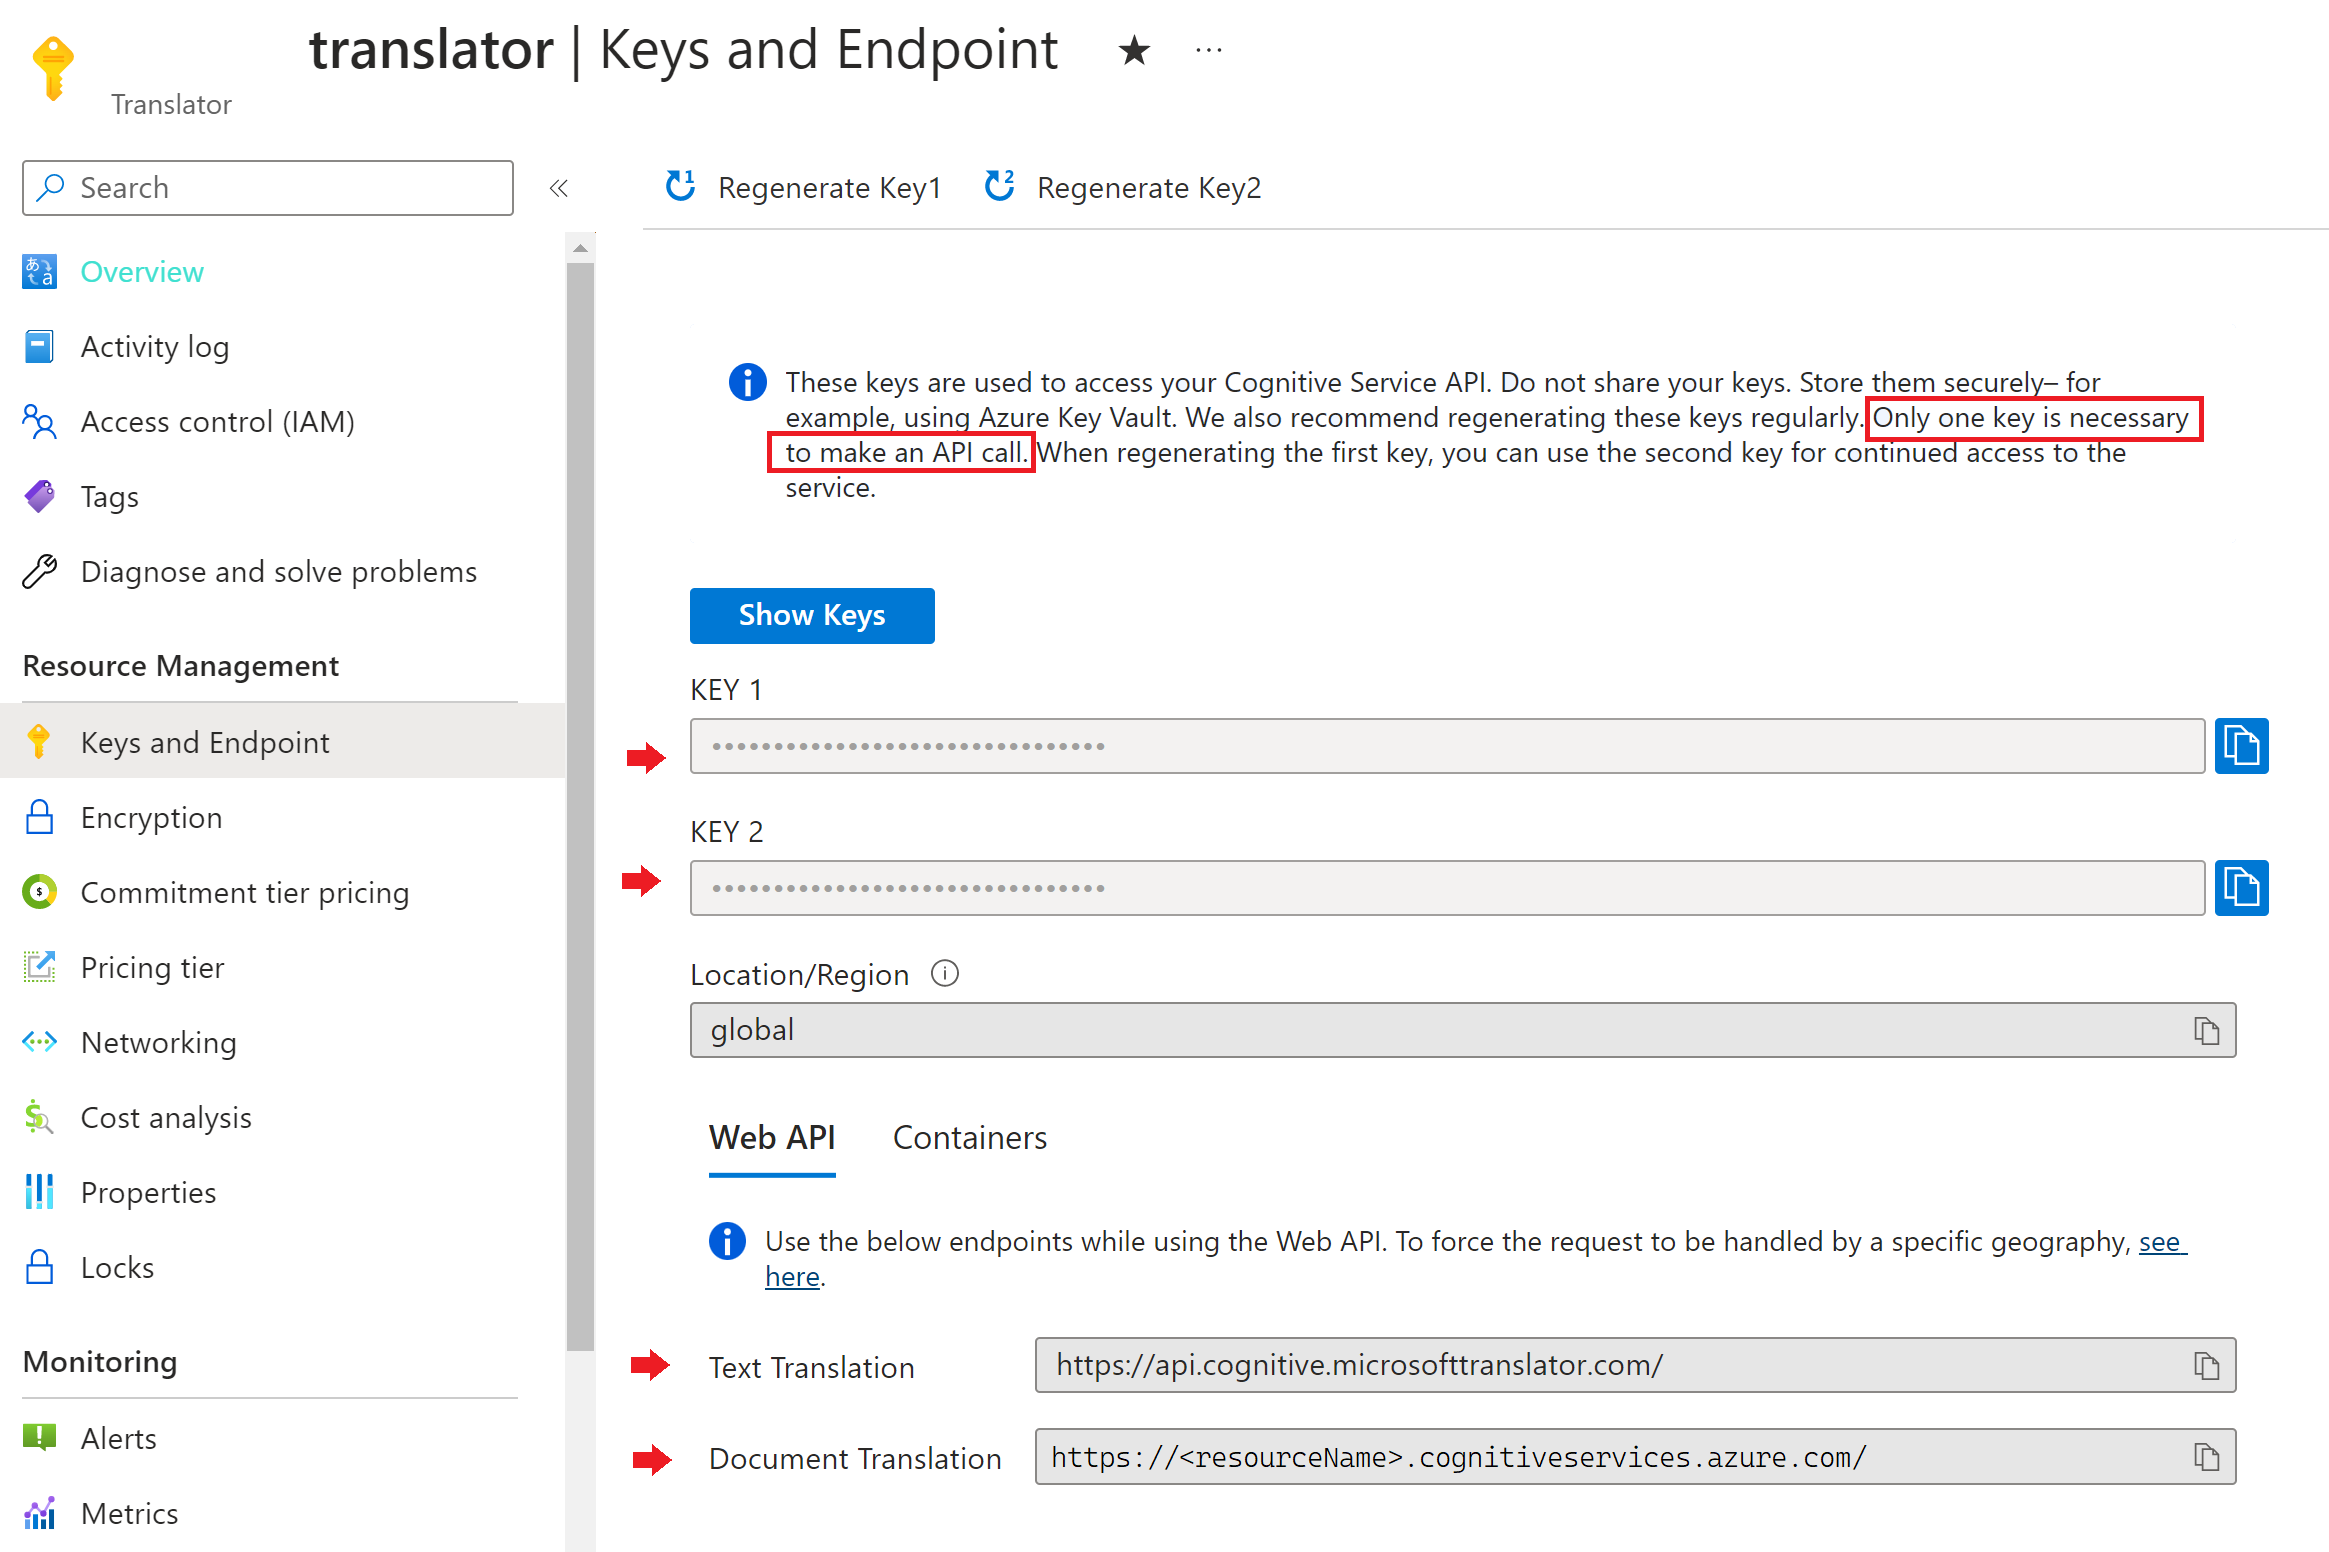 Screenshot of the Azure portal showing the Keys and Endpoint page of a Translator resource. The keys and endpoints are highlighted.